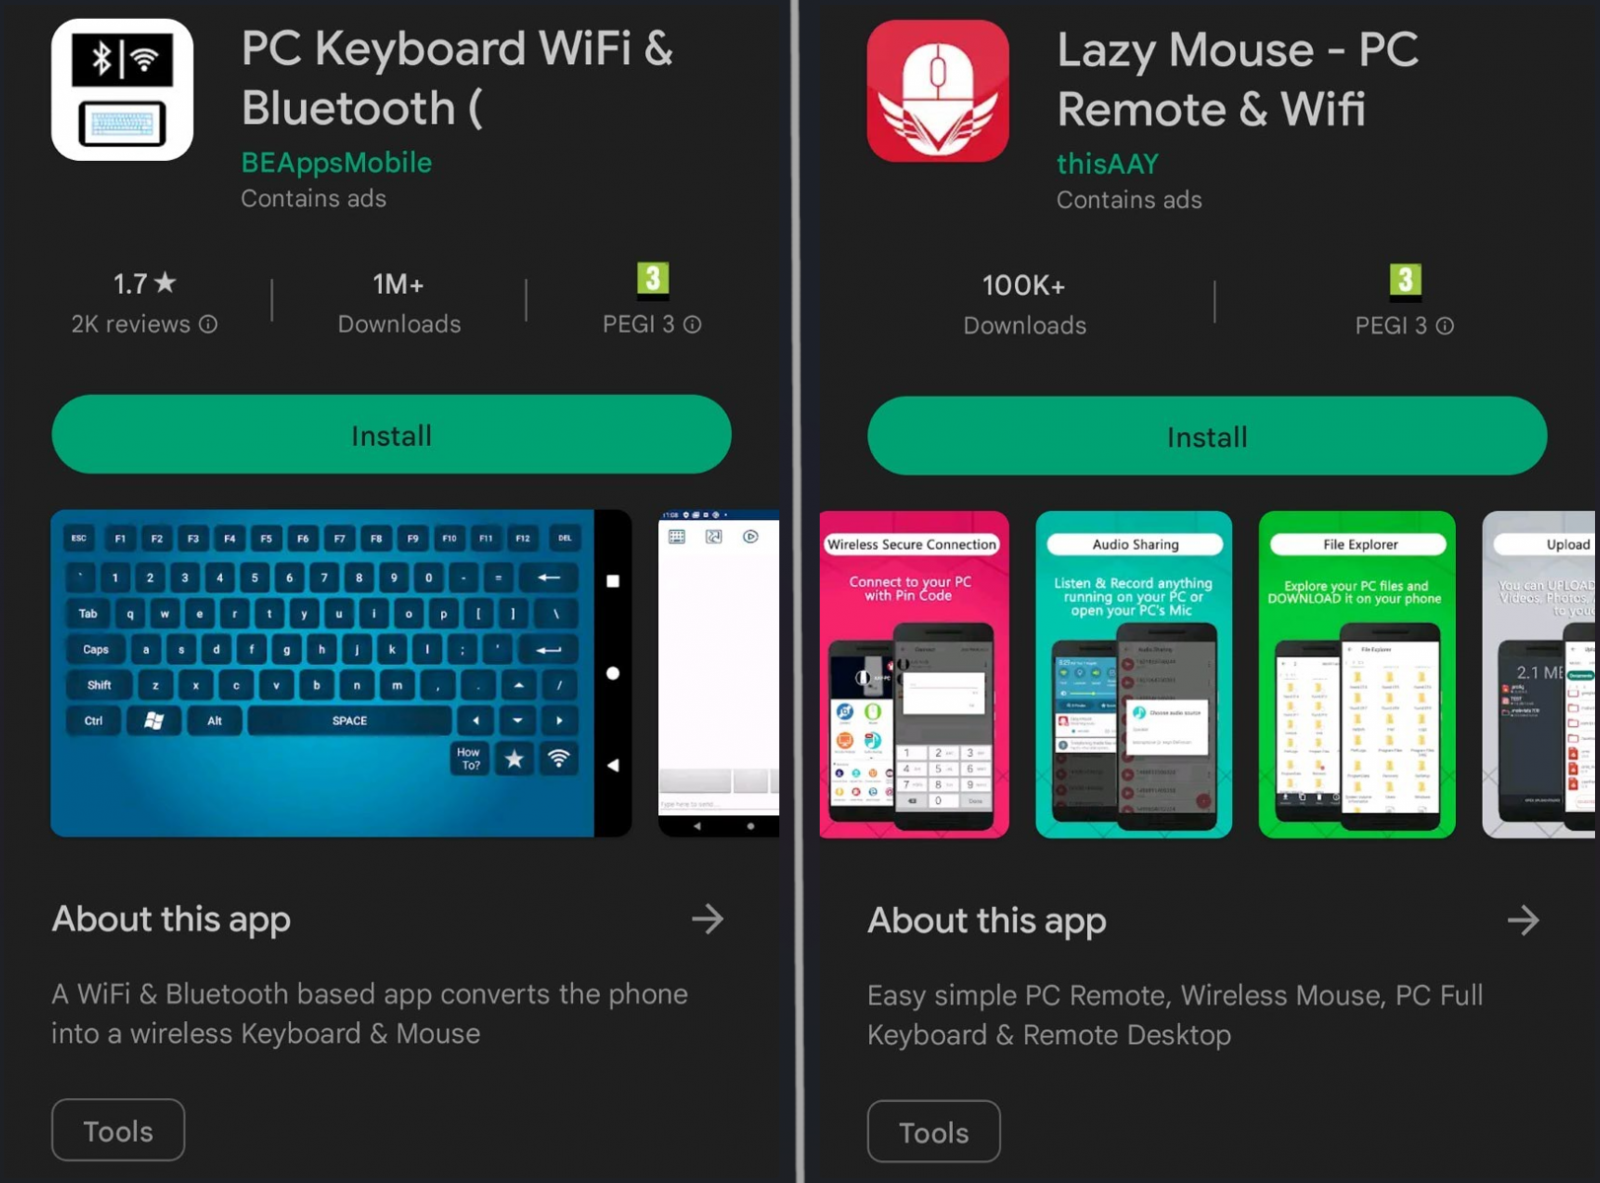 PC Keyboard and Lazy Mouse still available on Google Play